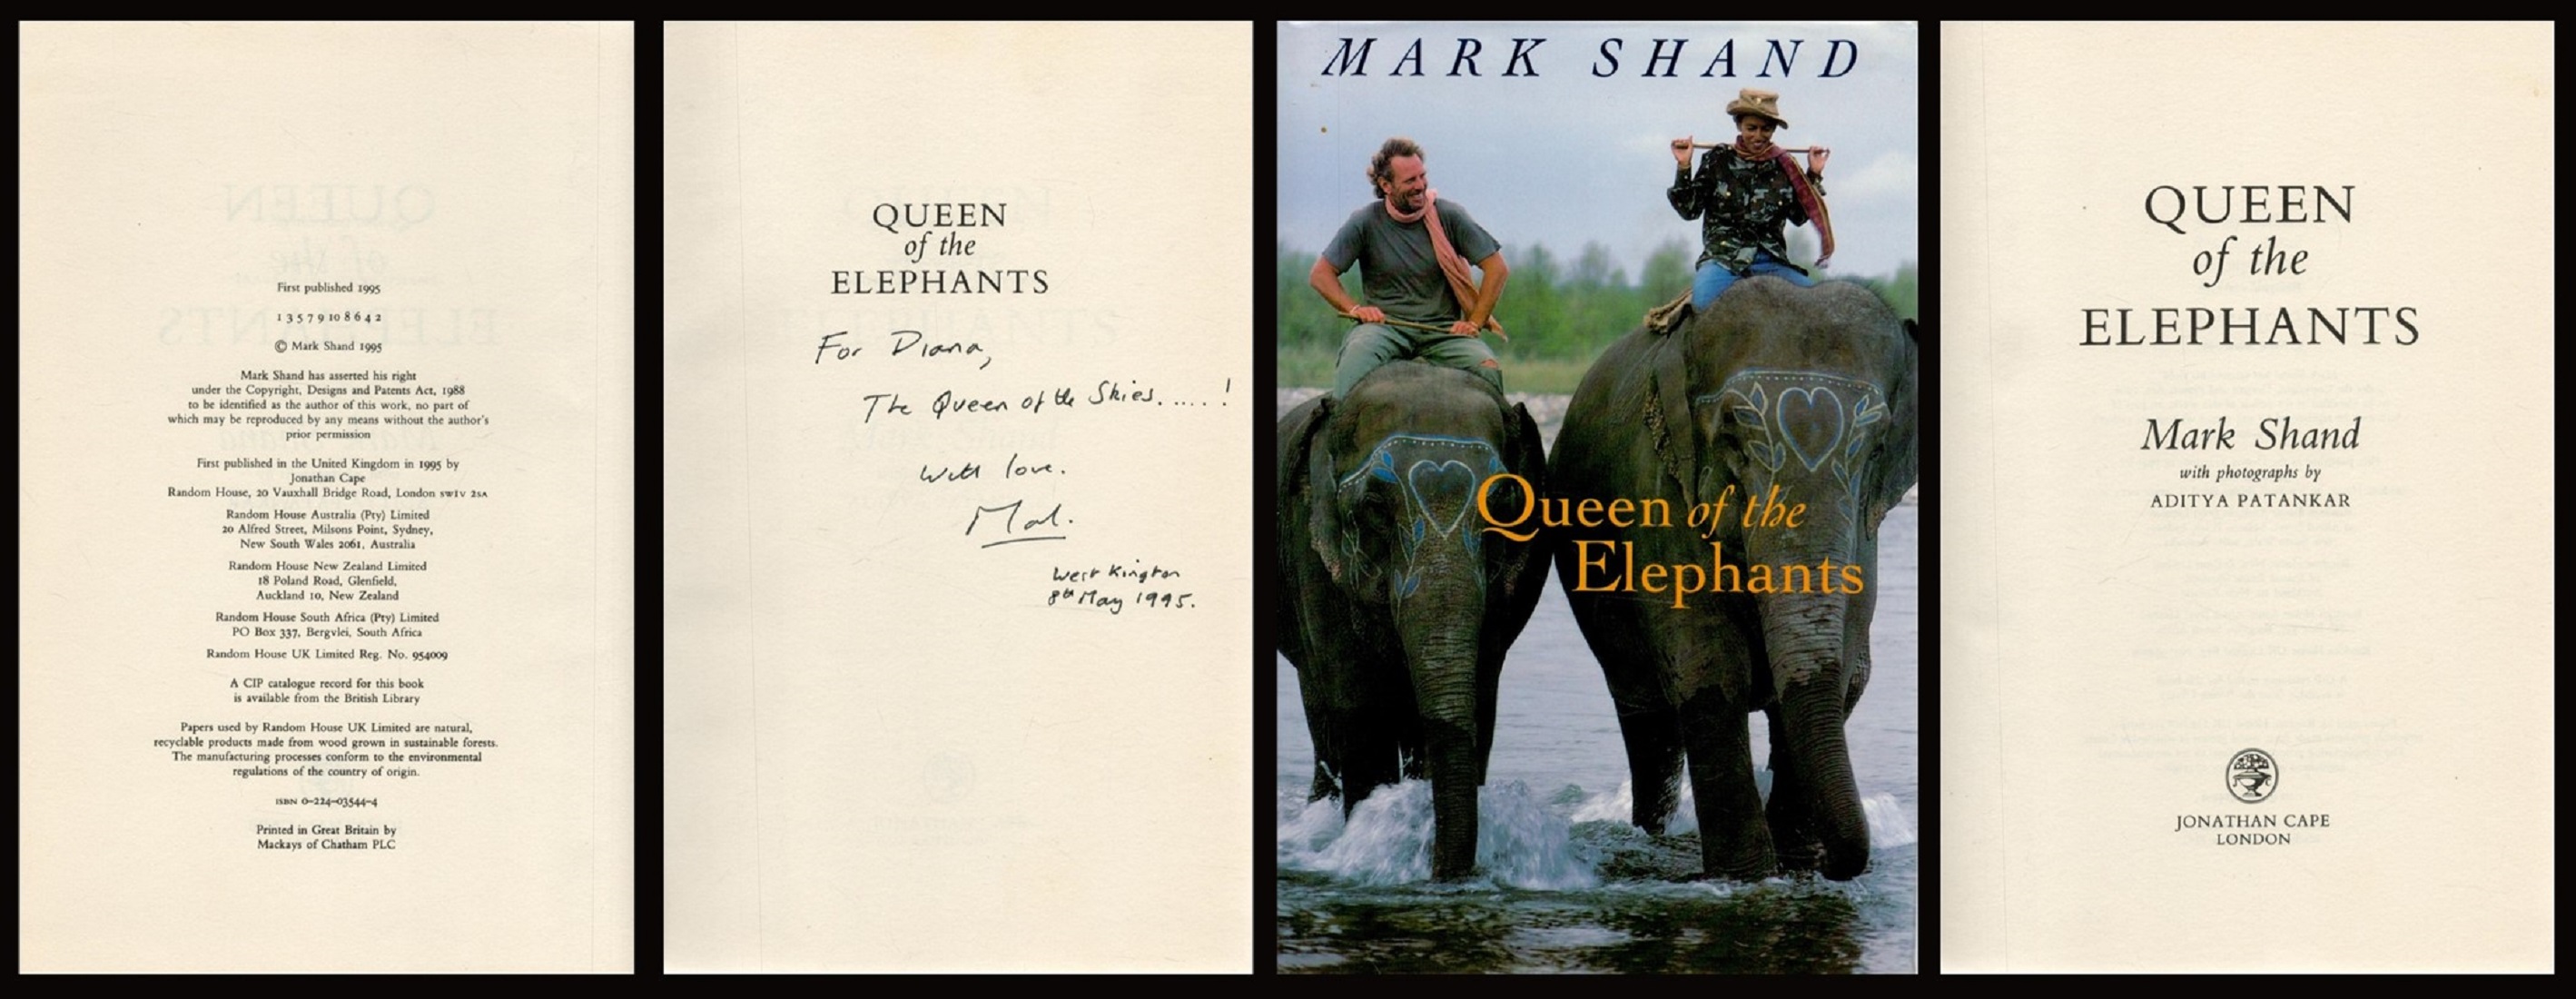 Mark Shand Queen of the Elephants. With photographs by Aditya Patankar. Published by Jonathan